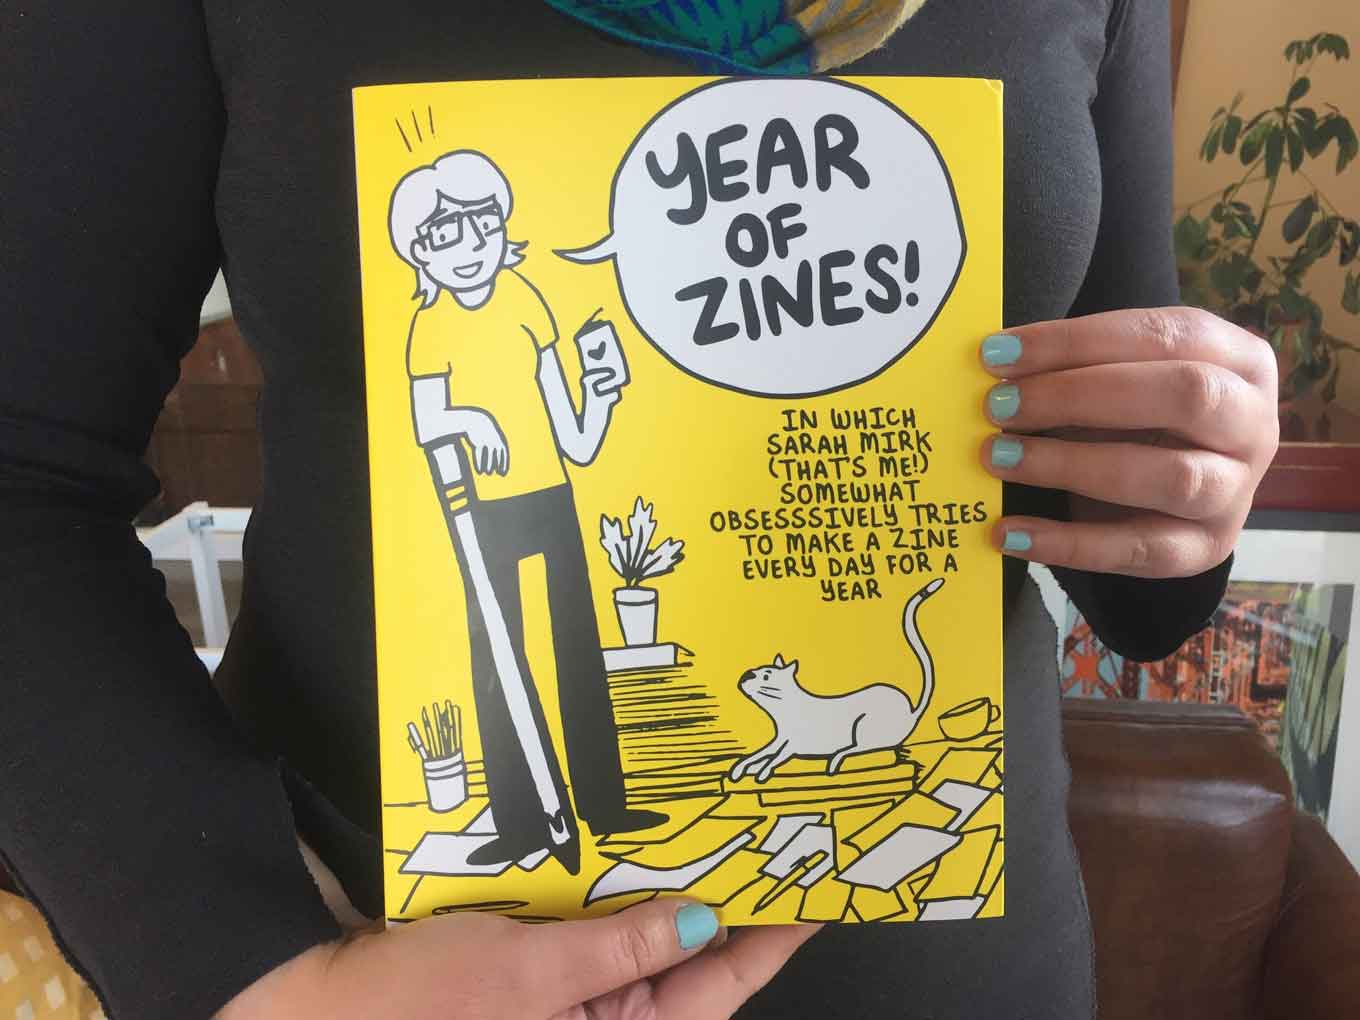 Someone holds up a copy of Sarah Mirk's book: "A Year of Zines"